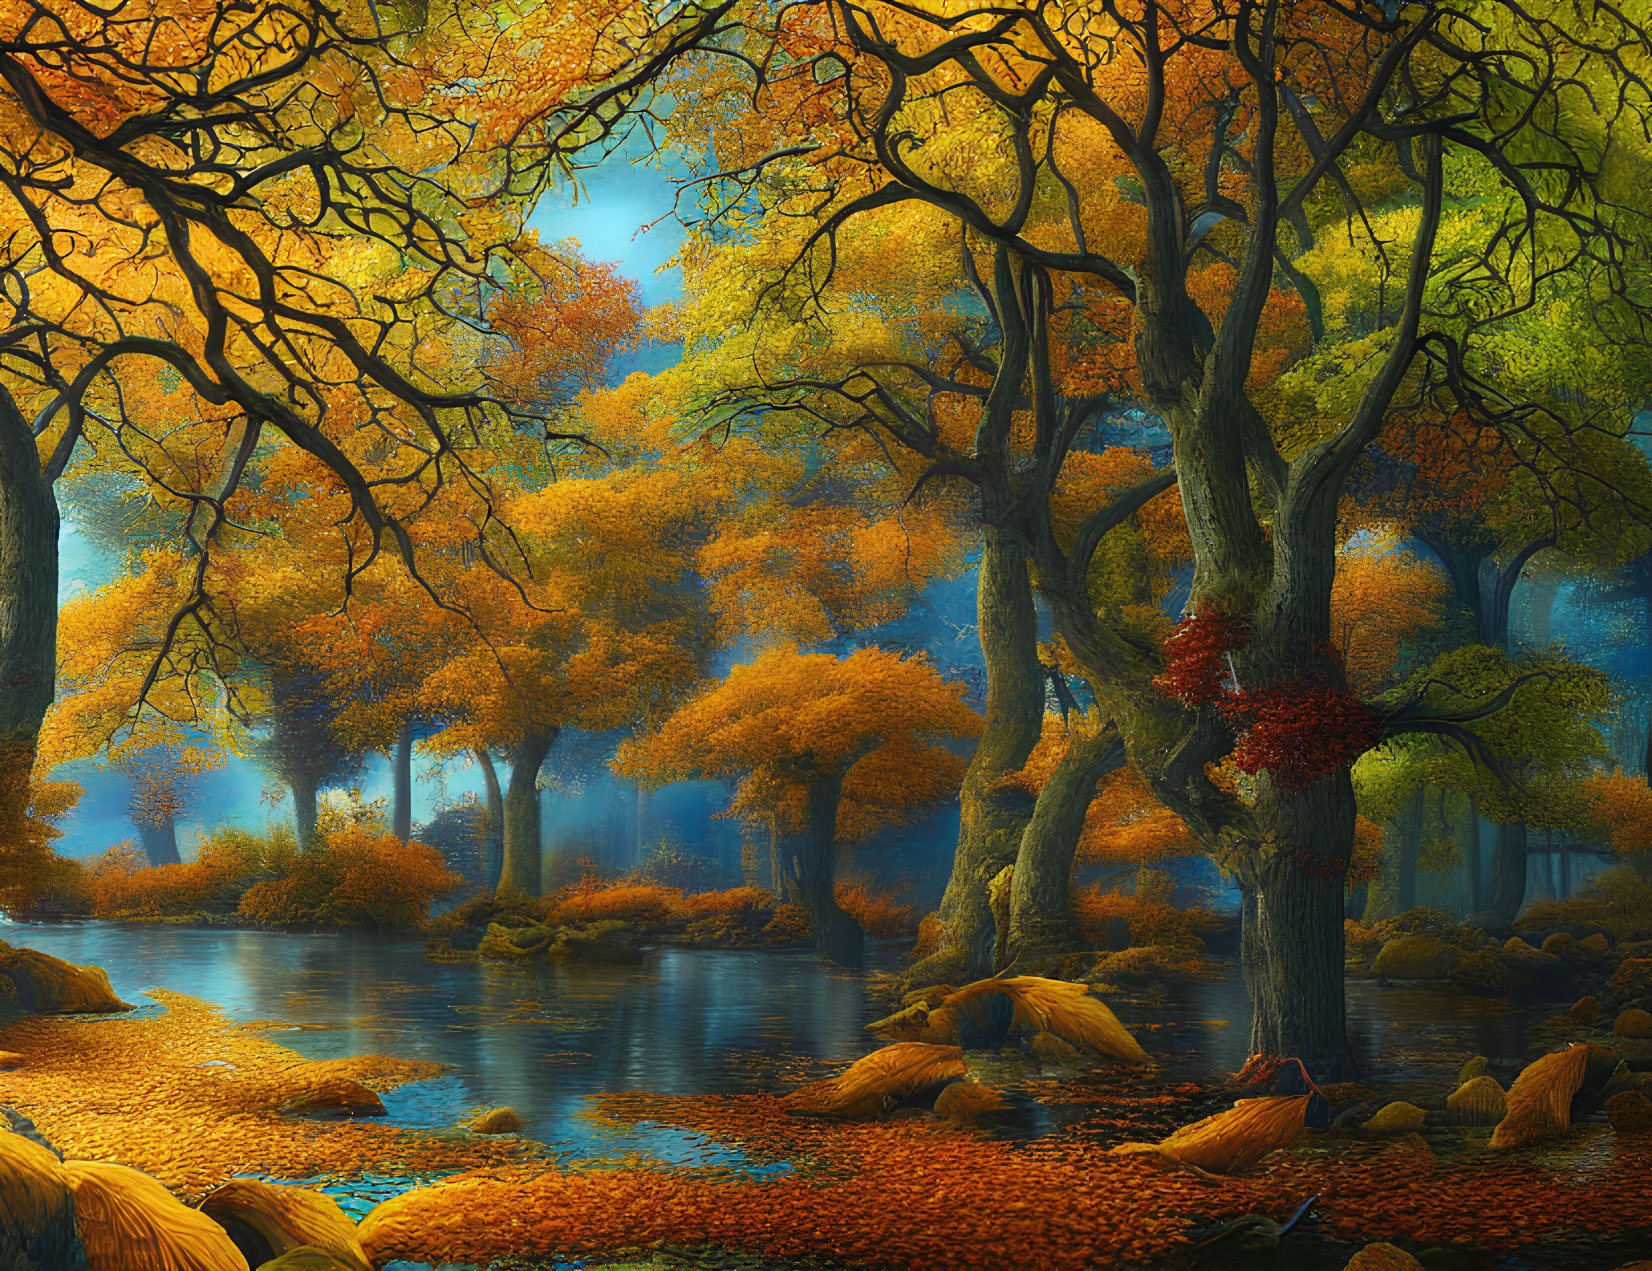 Scenic autumn forest with golden foliage, serene river, and colorful canopy